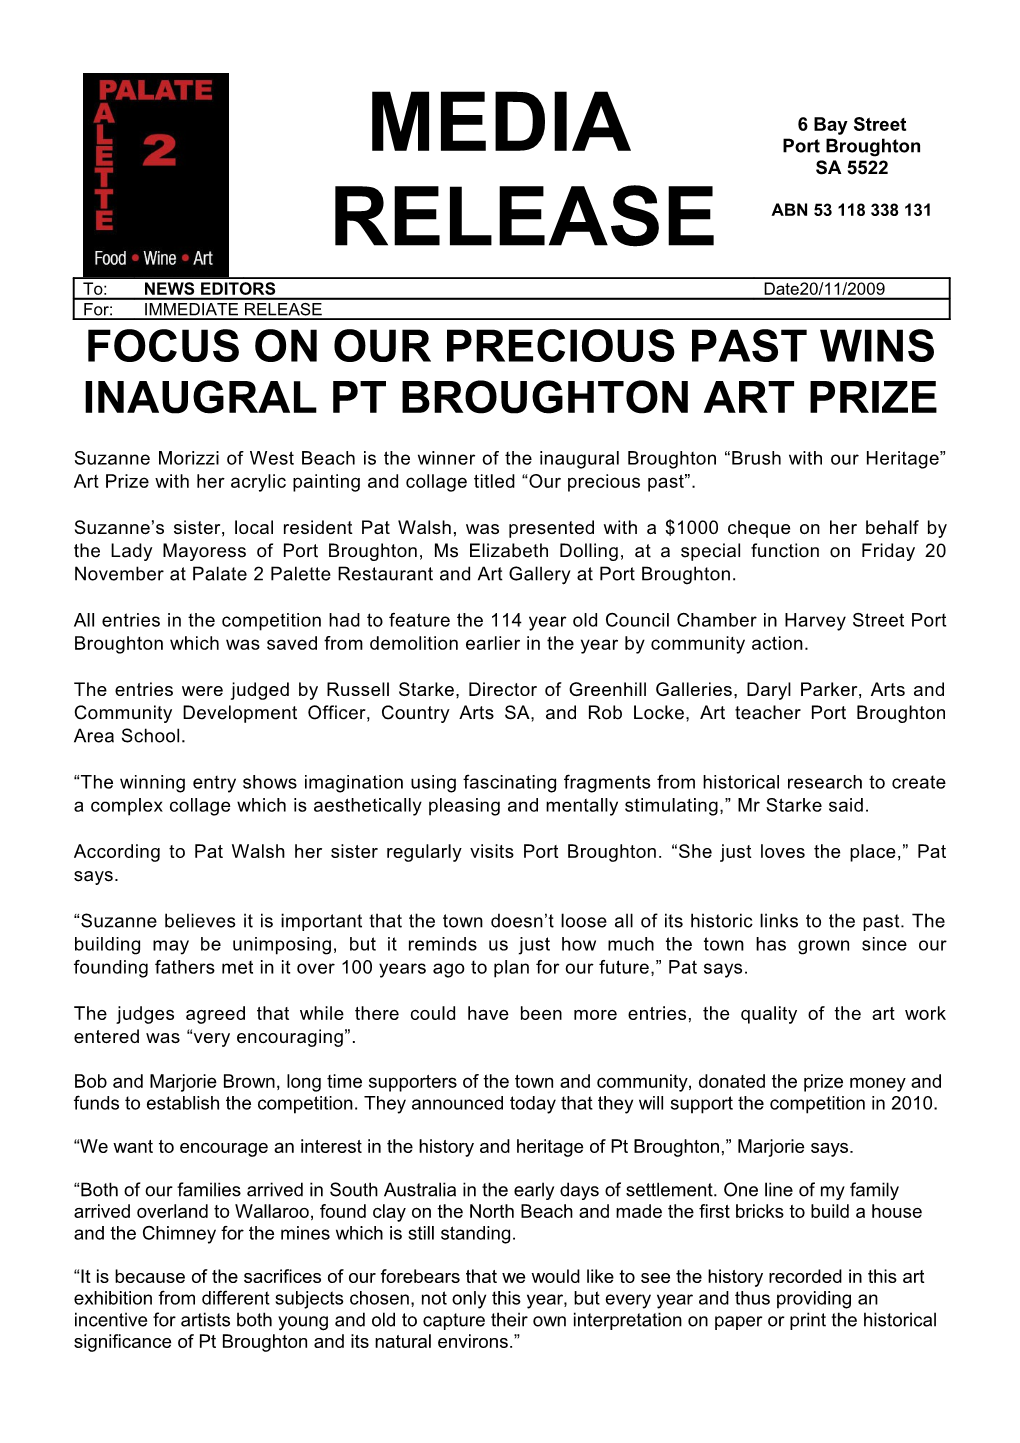 Focus on Our Precious Past Wins Inaugral Pt Broughton Art Prize